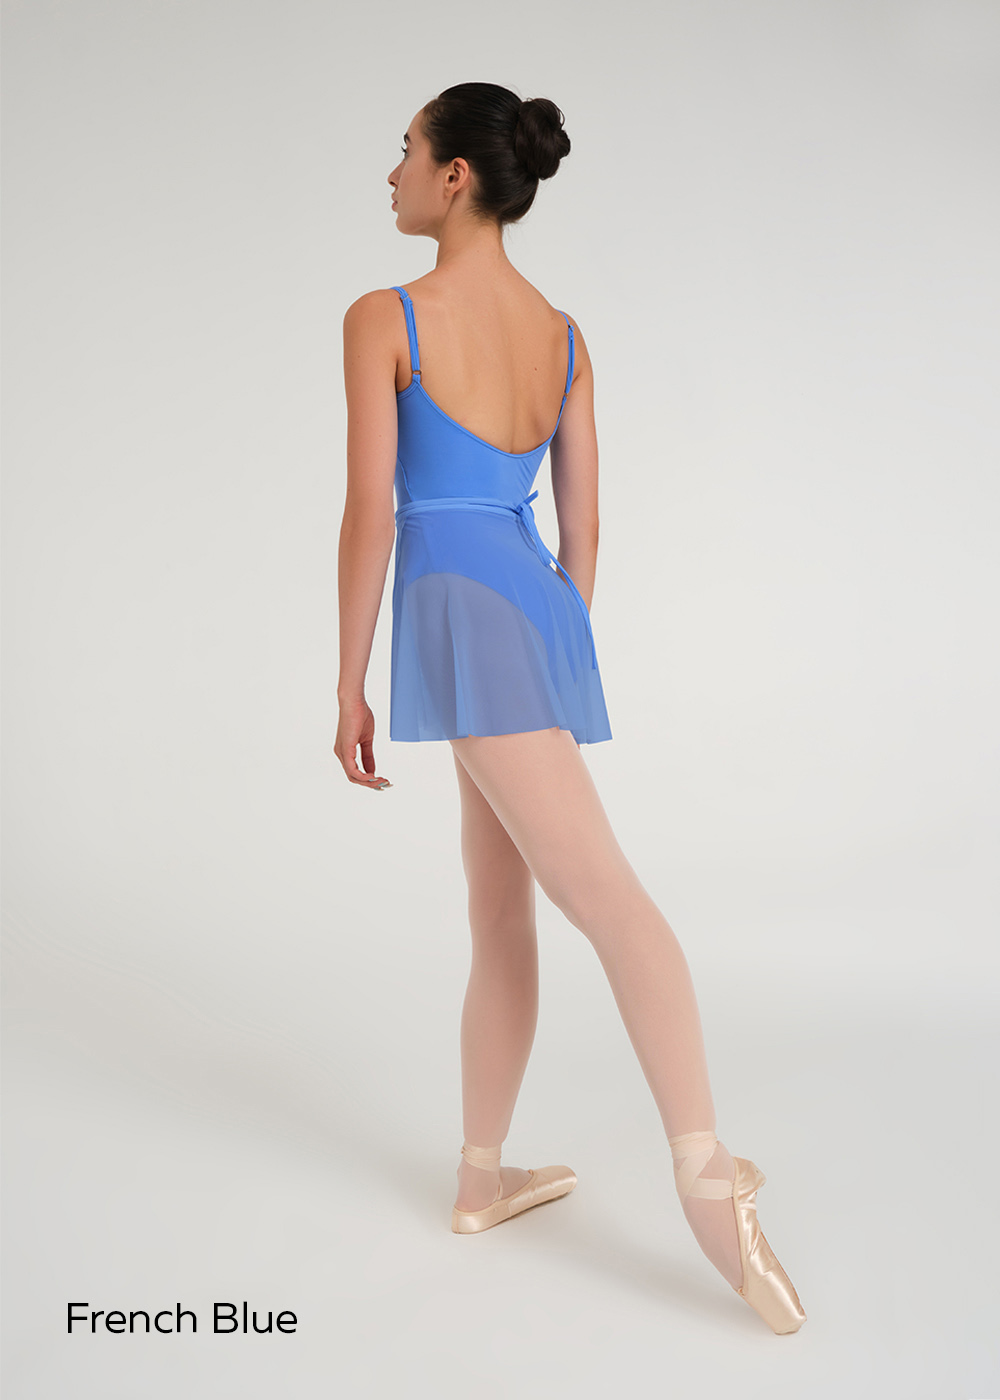 official pointe with dance online shoes EDEN, in shop Nikolay® | skirt of - Mesh and apparel the (DA2006N) USA ties